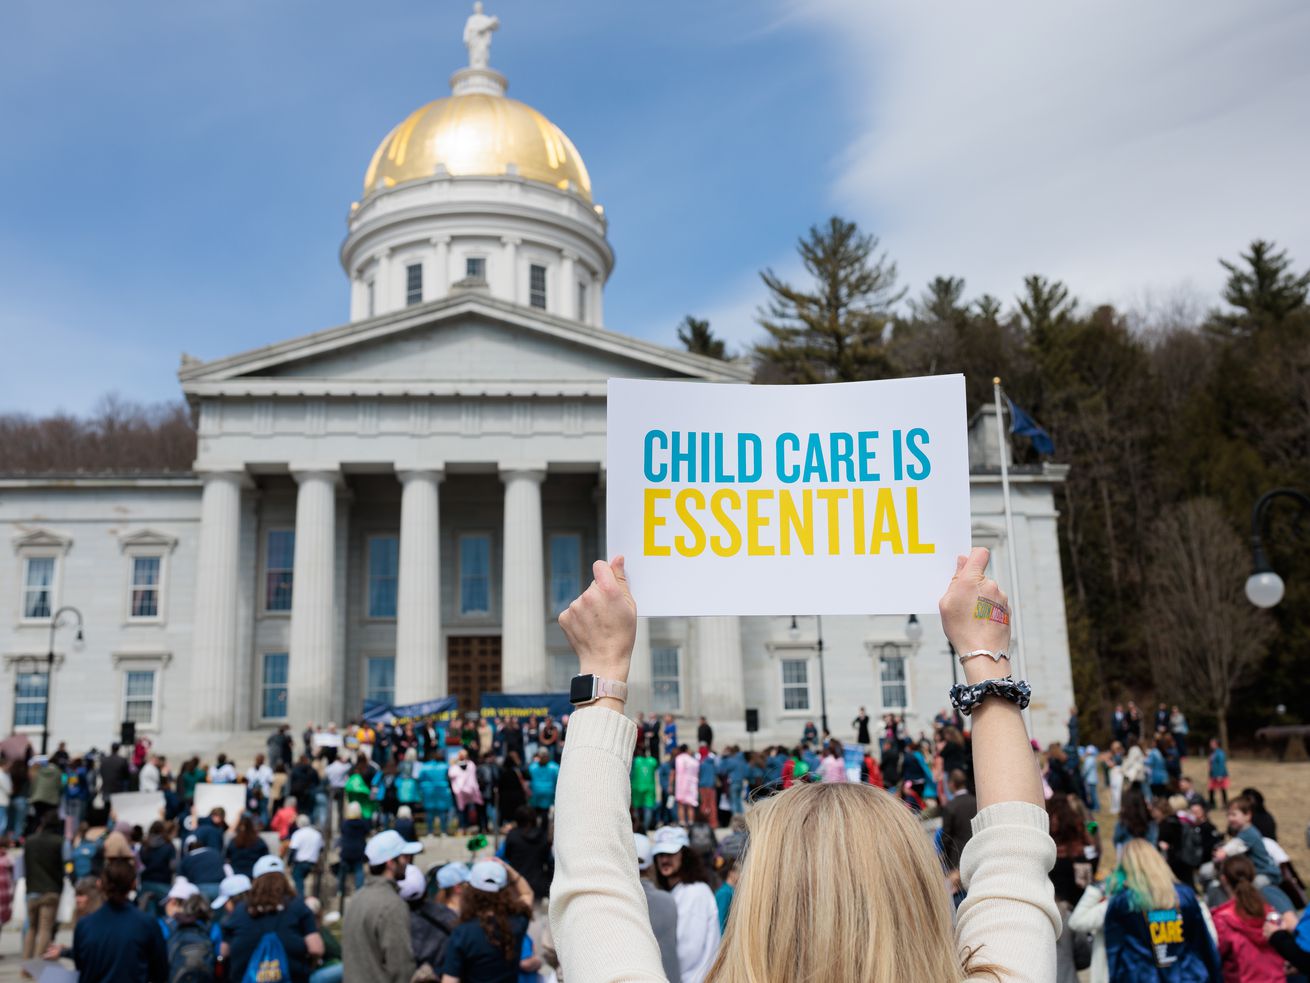 A protester in a crowd in front of a domed government building holds a sign that reads “Child care is essential.”